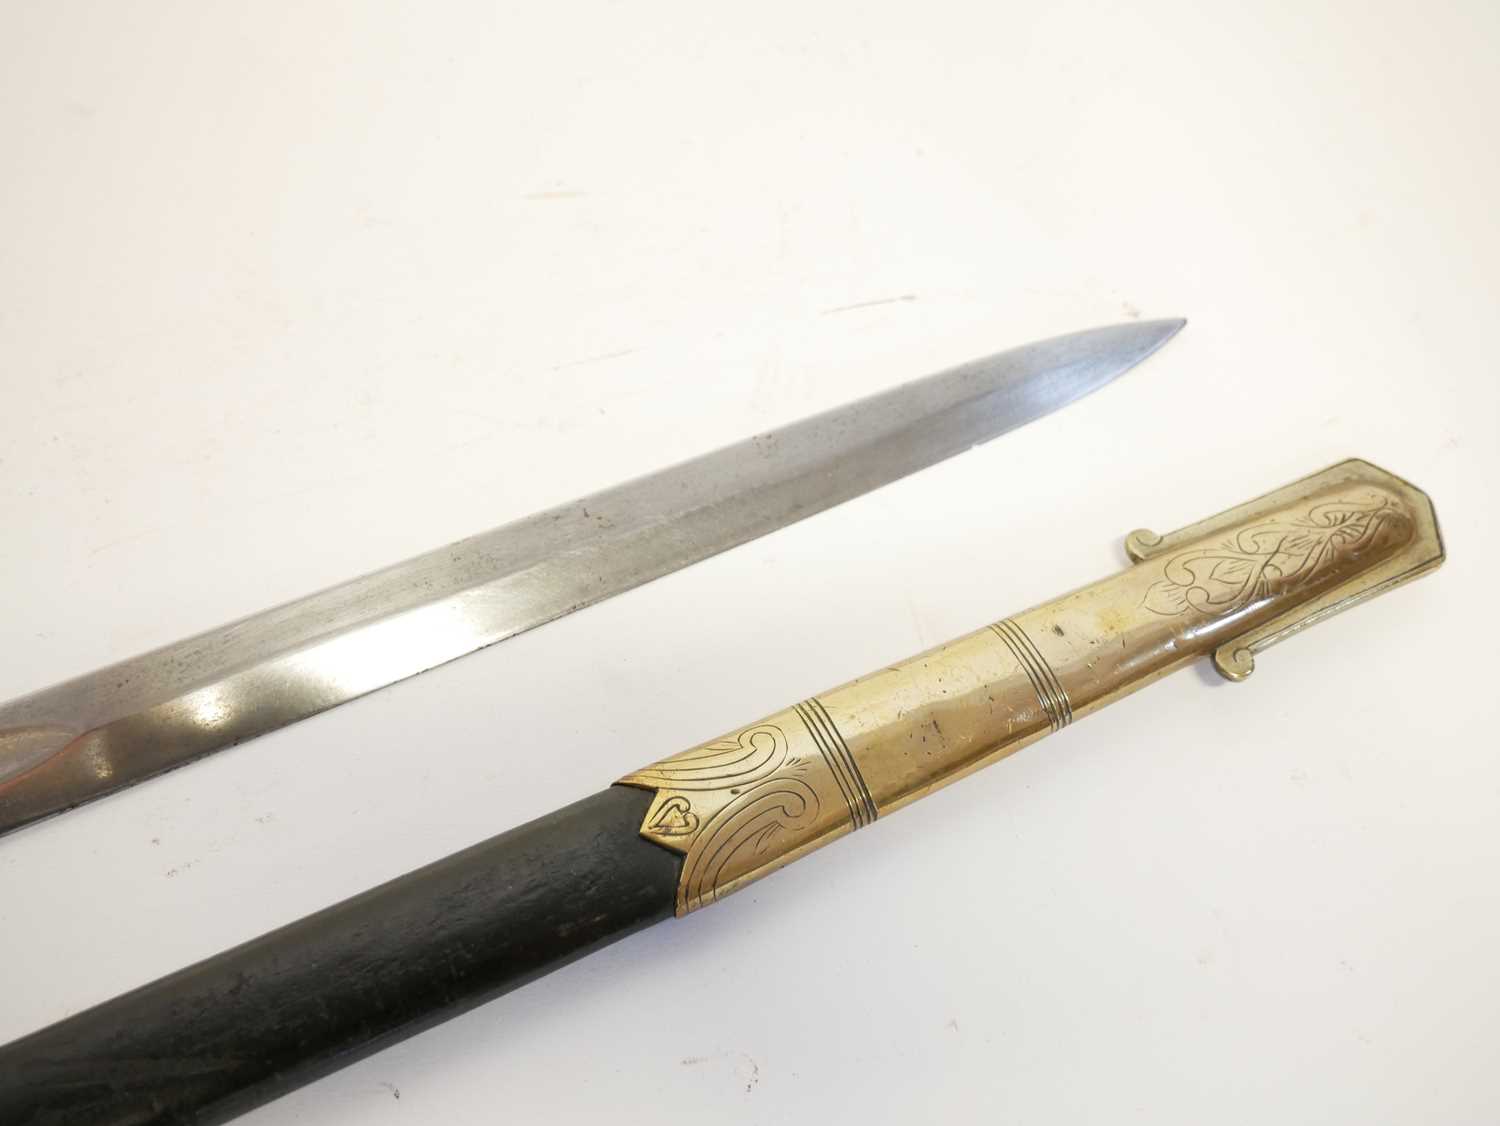 Royal Navy Petty Officer's sword, similar to an 1827 Naval sword but without the lion head pommel, - Image 9 of 16